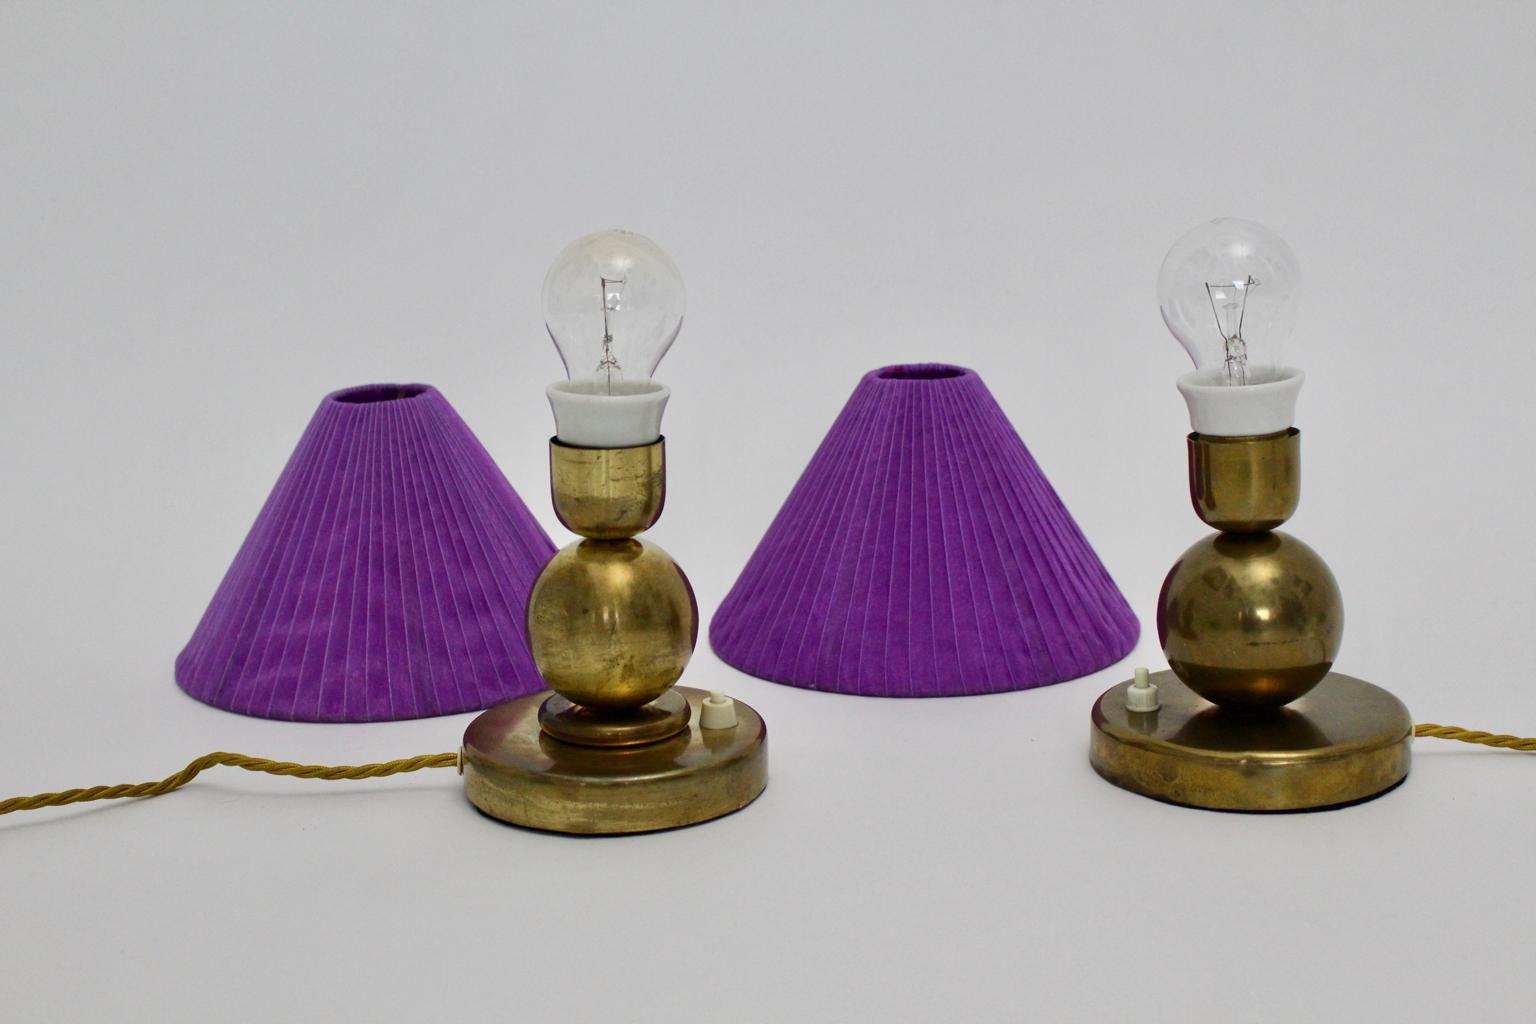 Metal Art Deco Brass Vintage Table Lamps with Lilac Lamp Shade 1930s, France